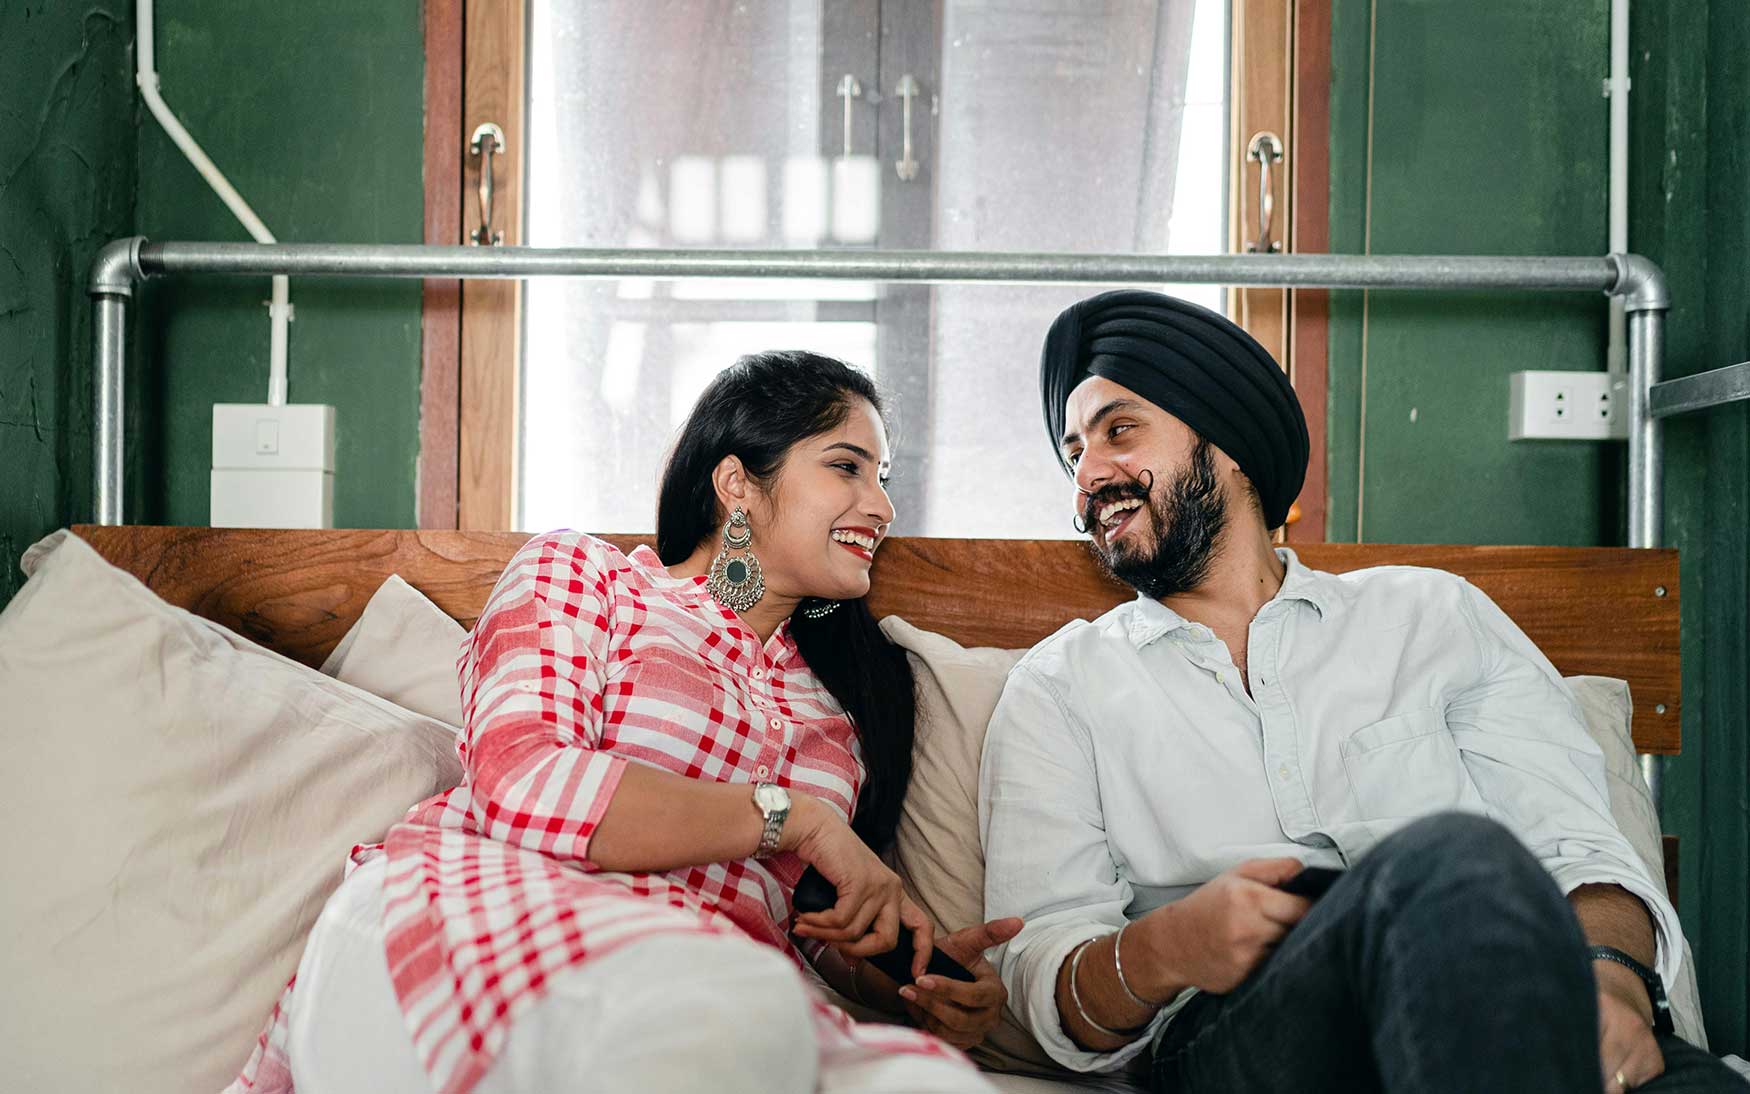 two people - one with a turban - sit on a bed talking